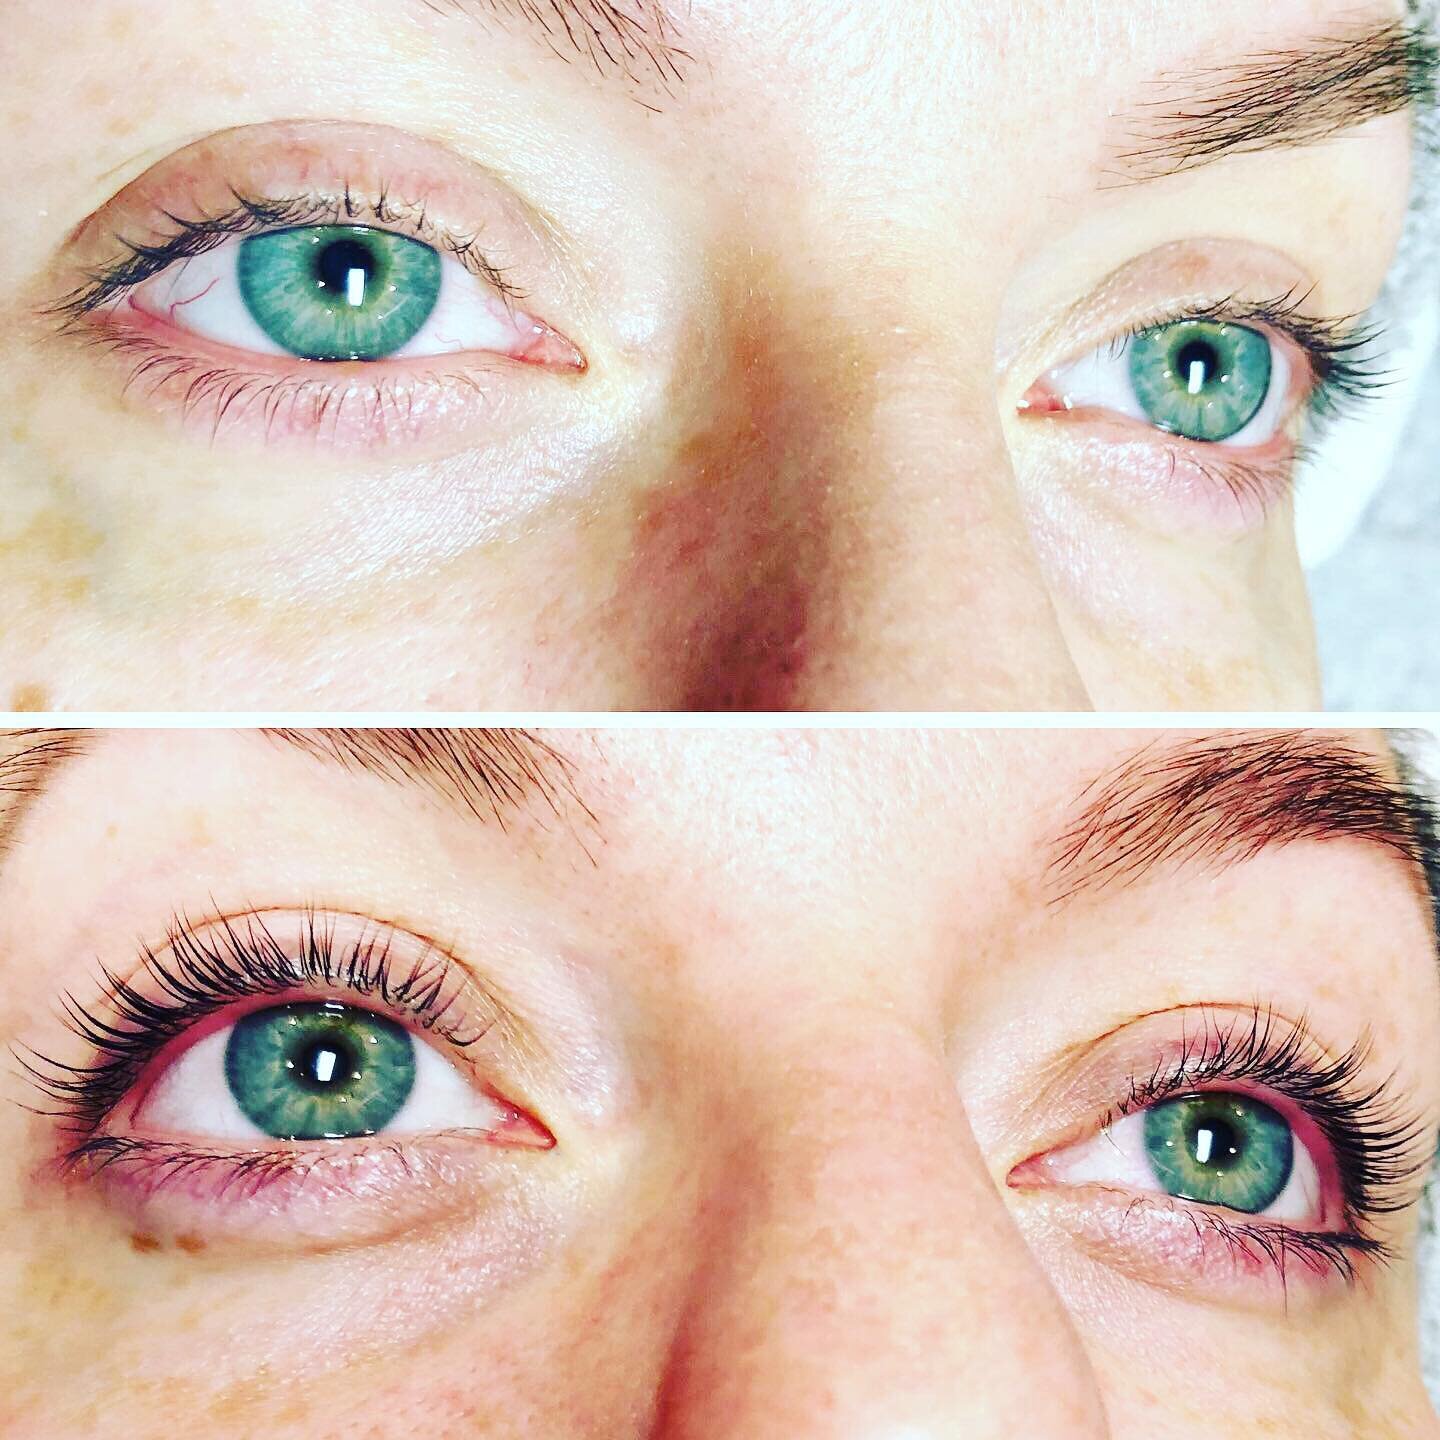 Her eyes are like a crystal clear sea, and in the waves of change, we find our true direction. 🌊

Good luck on your relocation to Colorado @megshaw14 and thank you for letting me add to your beauty before your departure! 
#iseayou #lashlift #lashtin